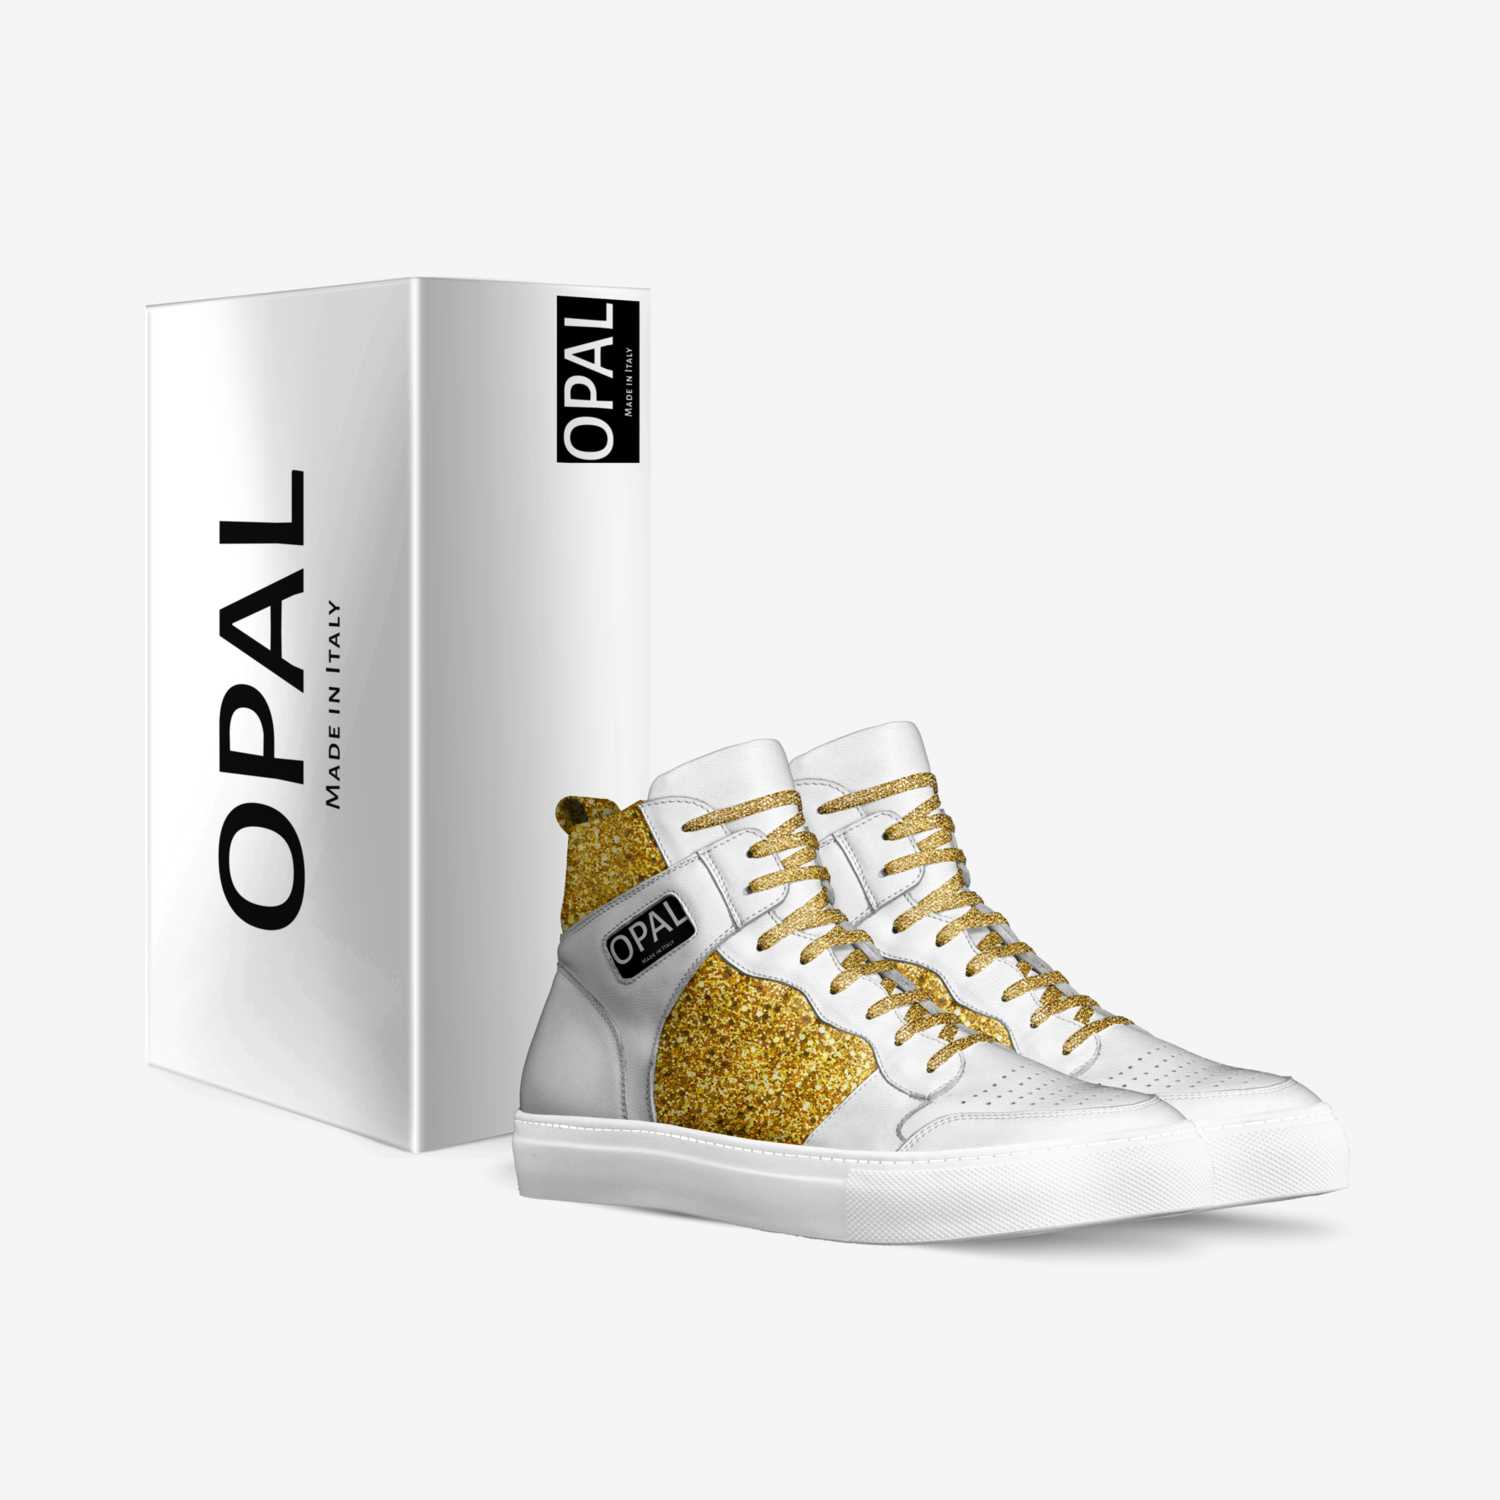 OPAL custom made in Italy shoes by Julien Casini | Box view